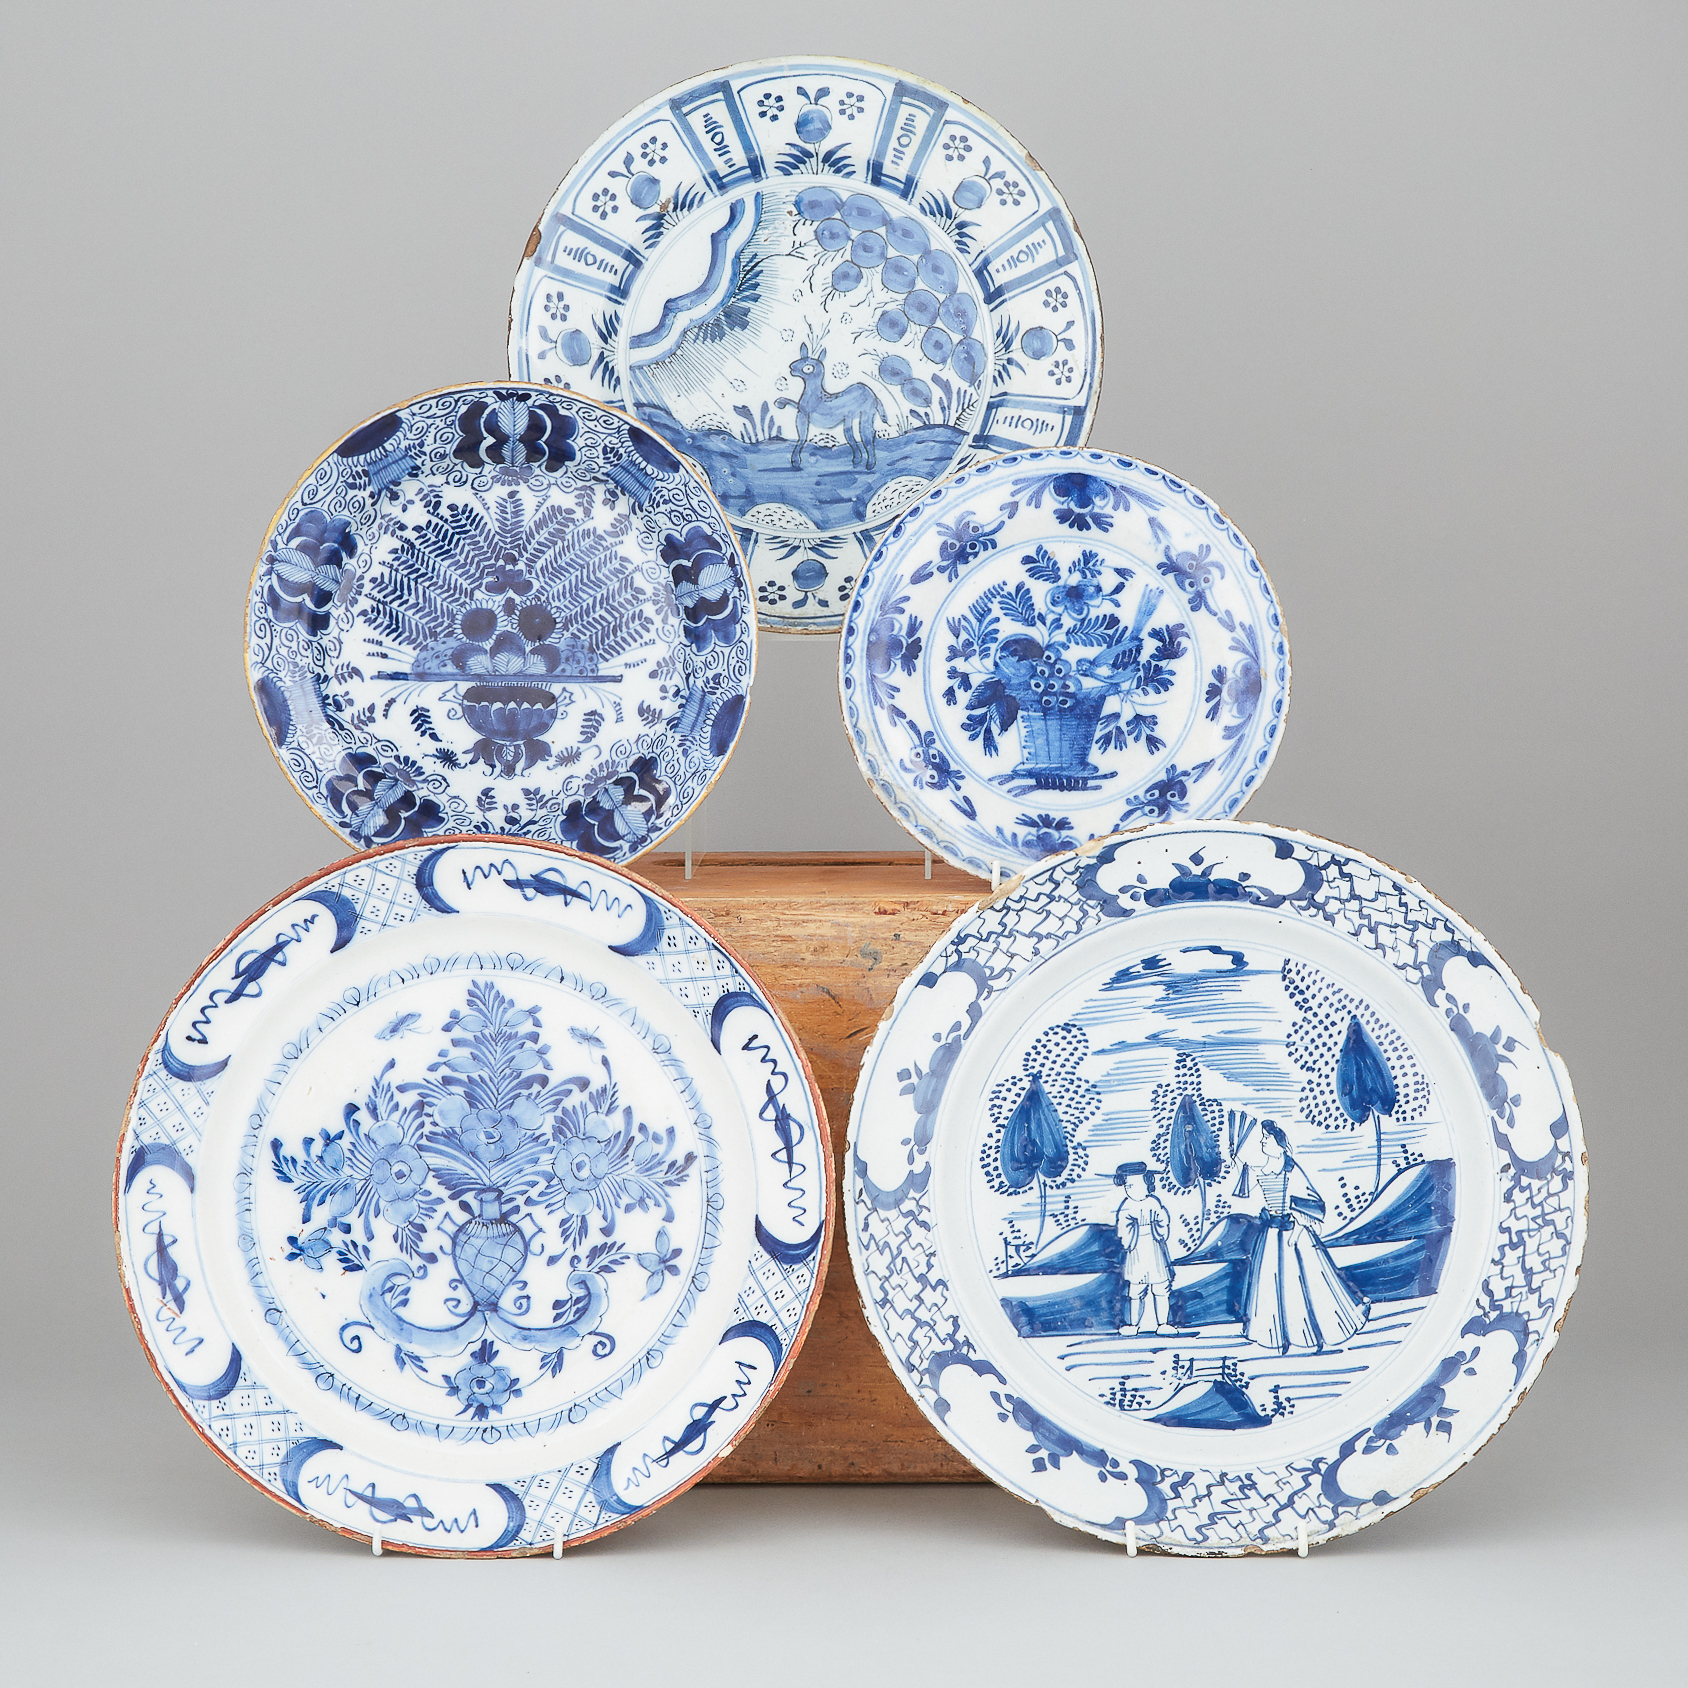 Five Various Blue Painted Delft Plates and Chargers, 18th/19th century